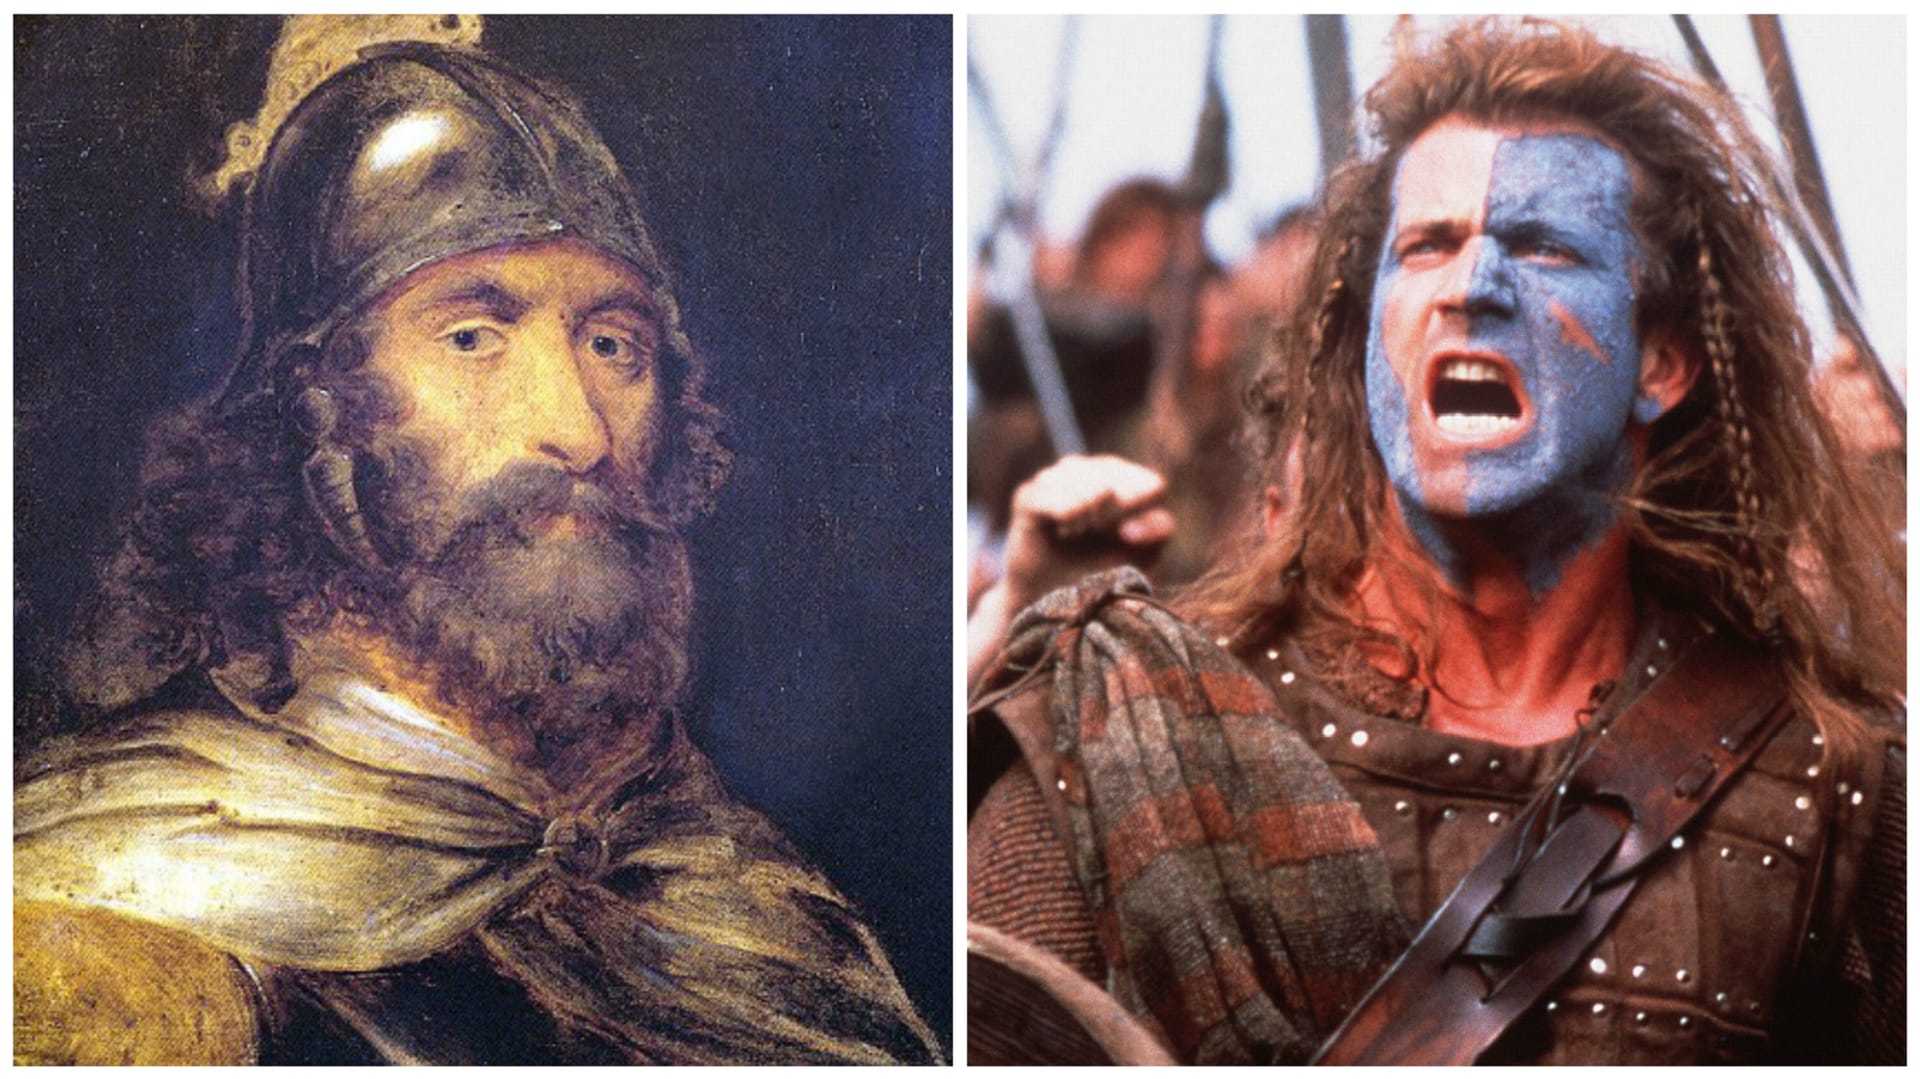 William Wallace vs Mel Gibson